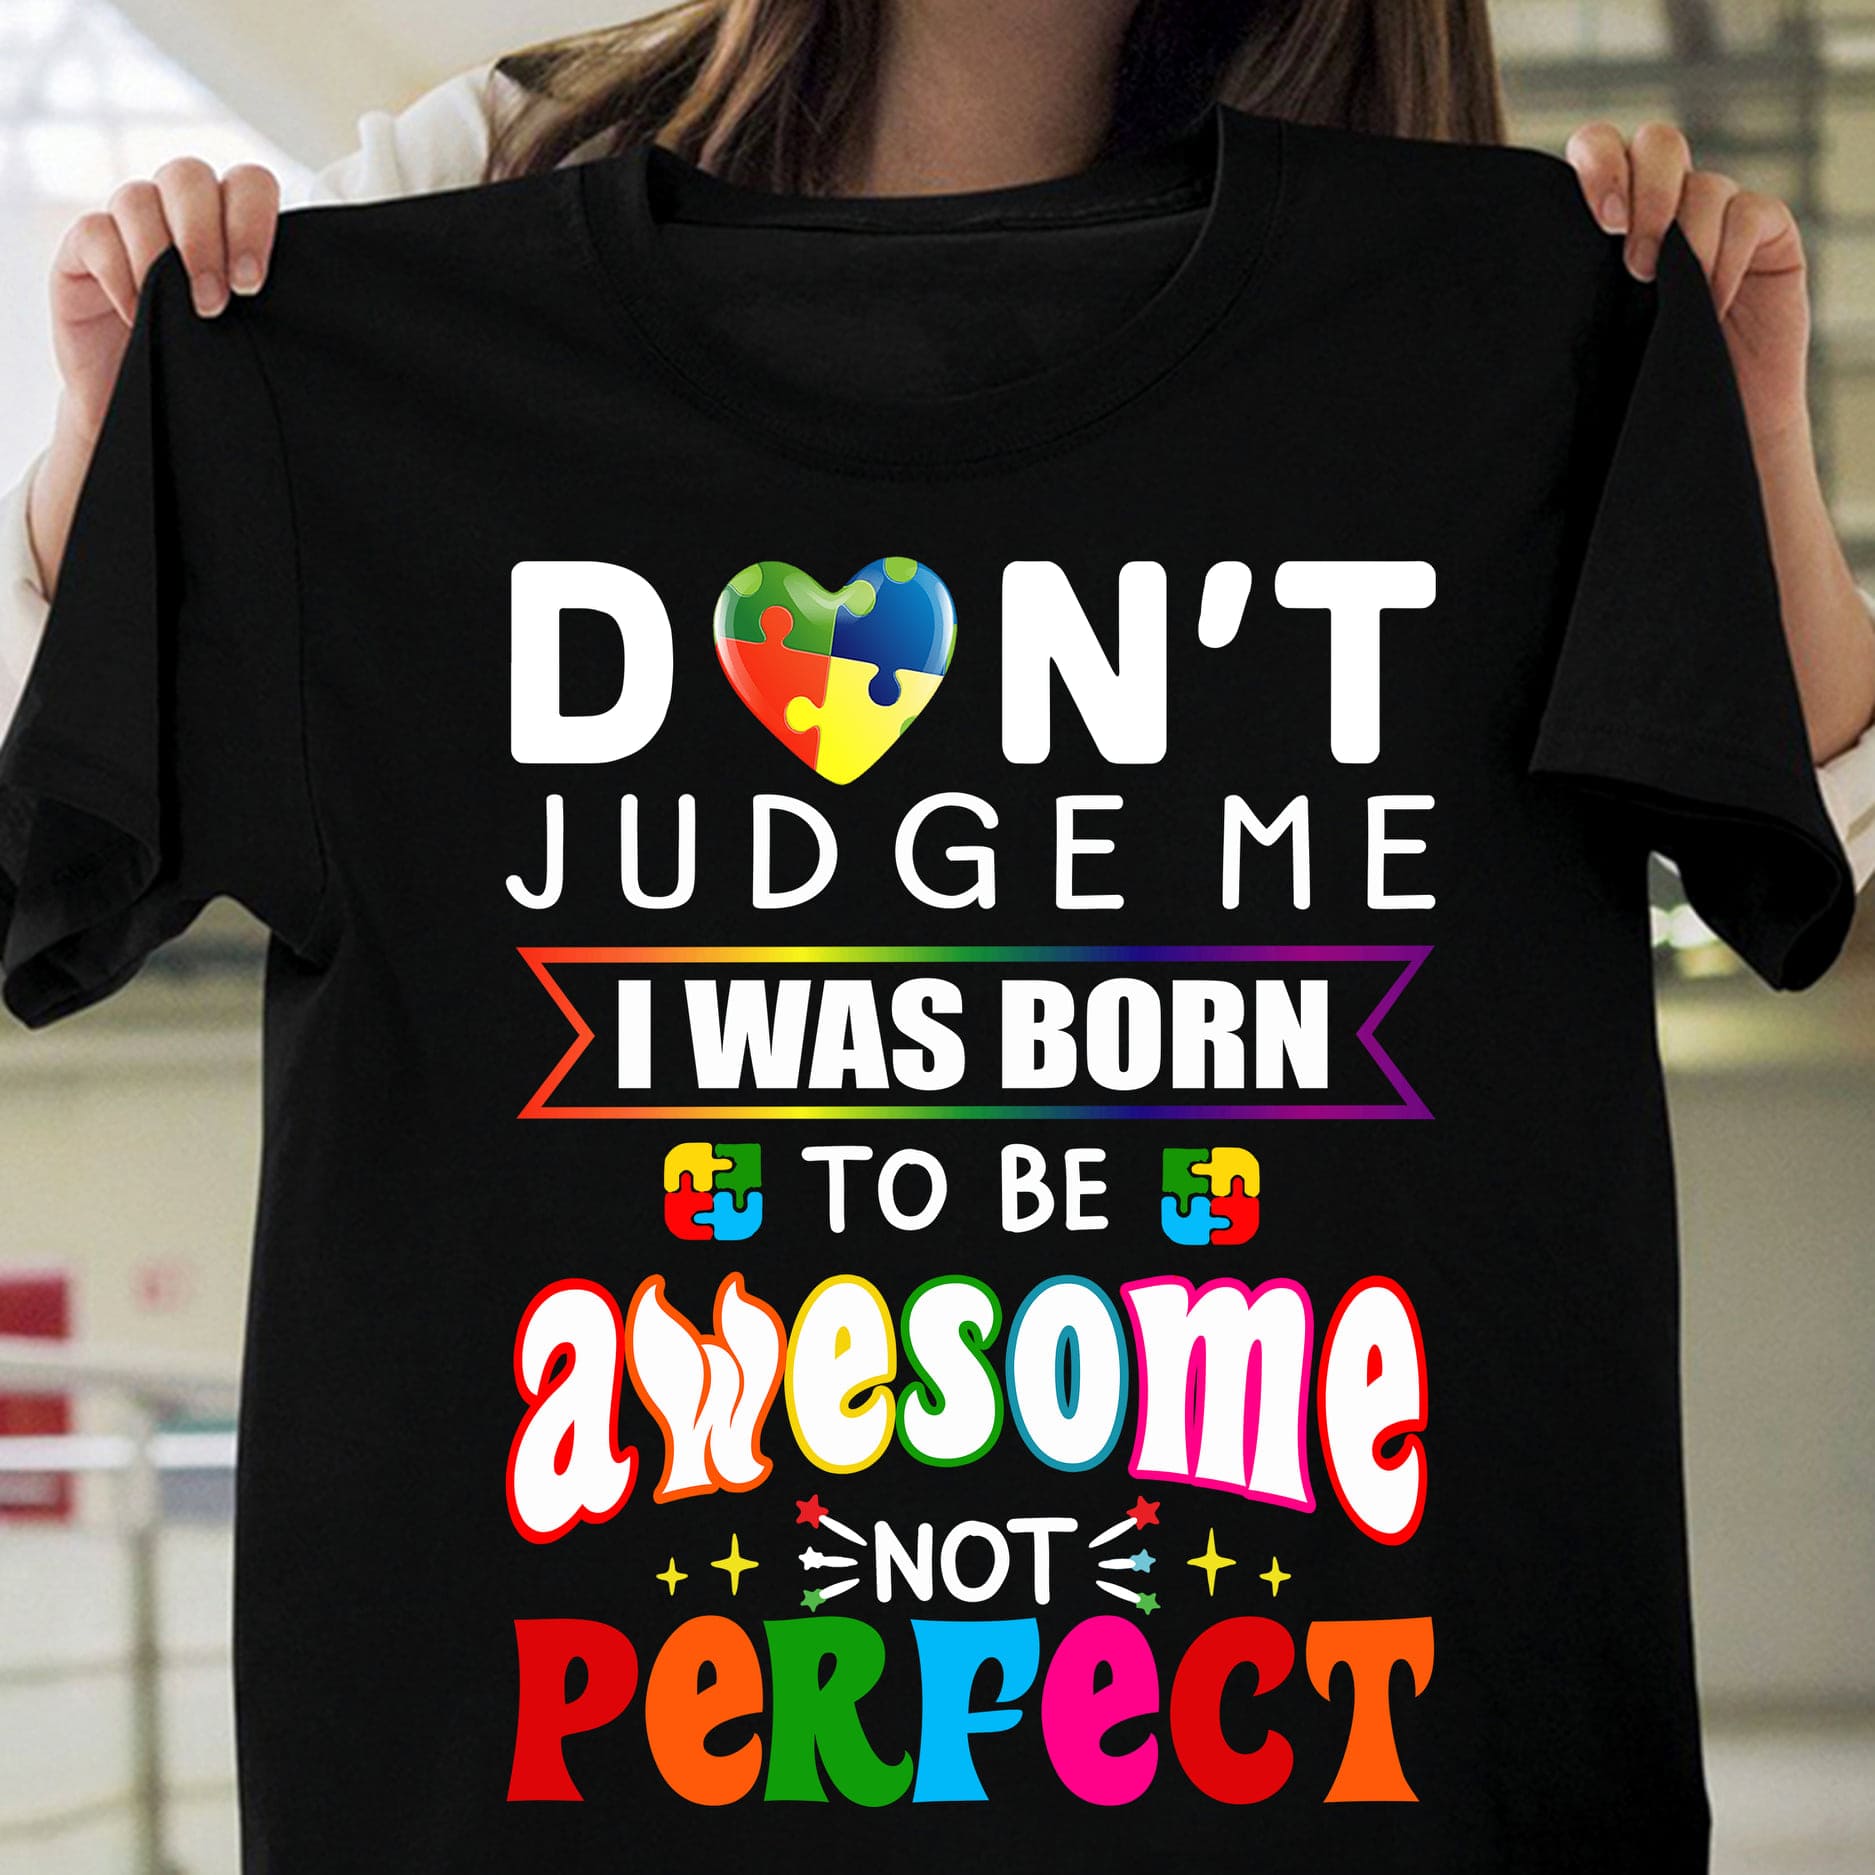 Don't judge me i was born to be awesome not perfect - Autism Awareness